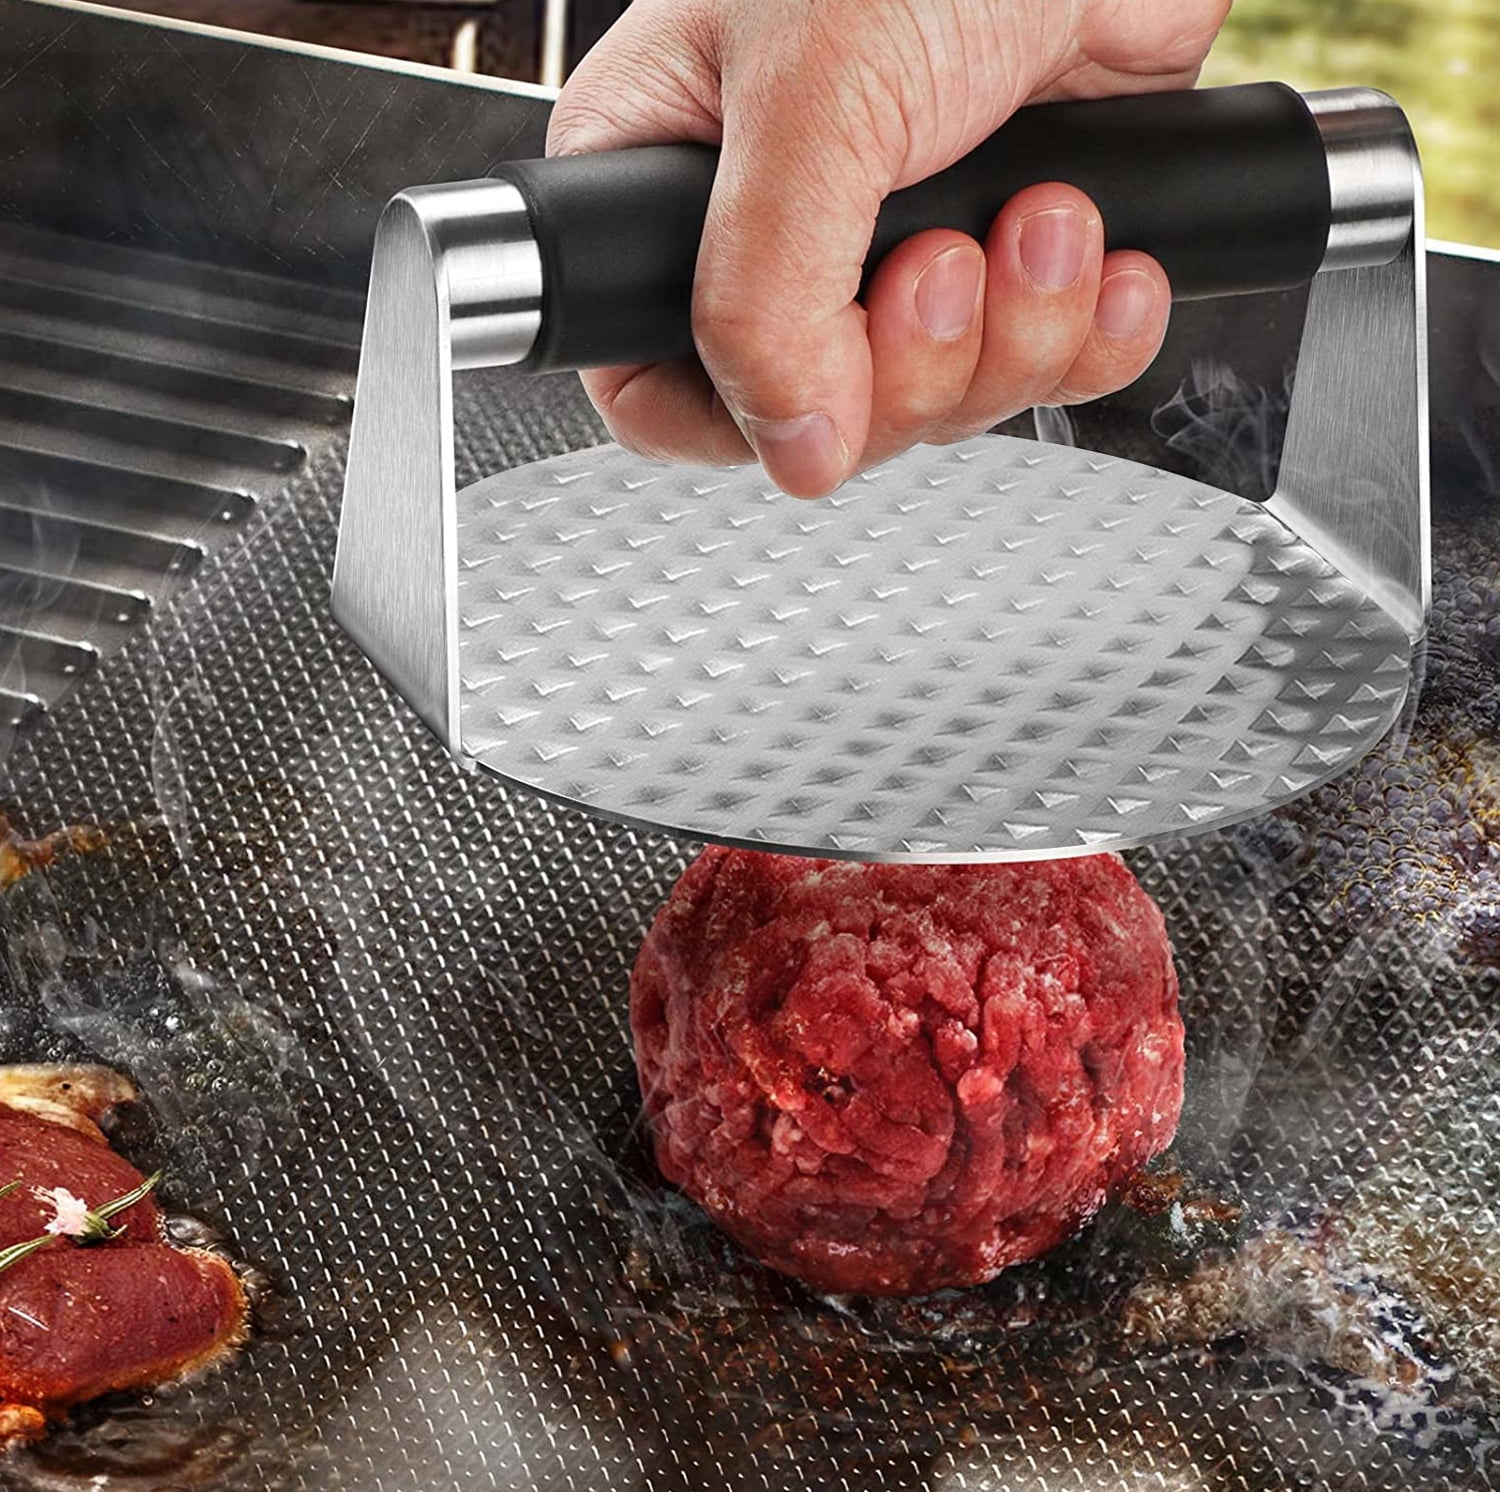 MALGASHAH Stainless Steel Smash Burger Press with Anti-Scald Handle +  Silicone Basting Brush for Cooking - Ground Beef Smasher to Perfectly Make  Flat